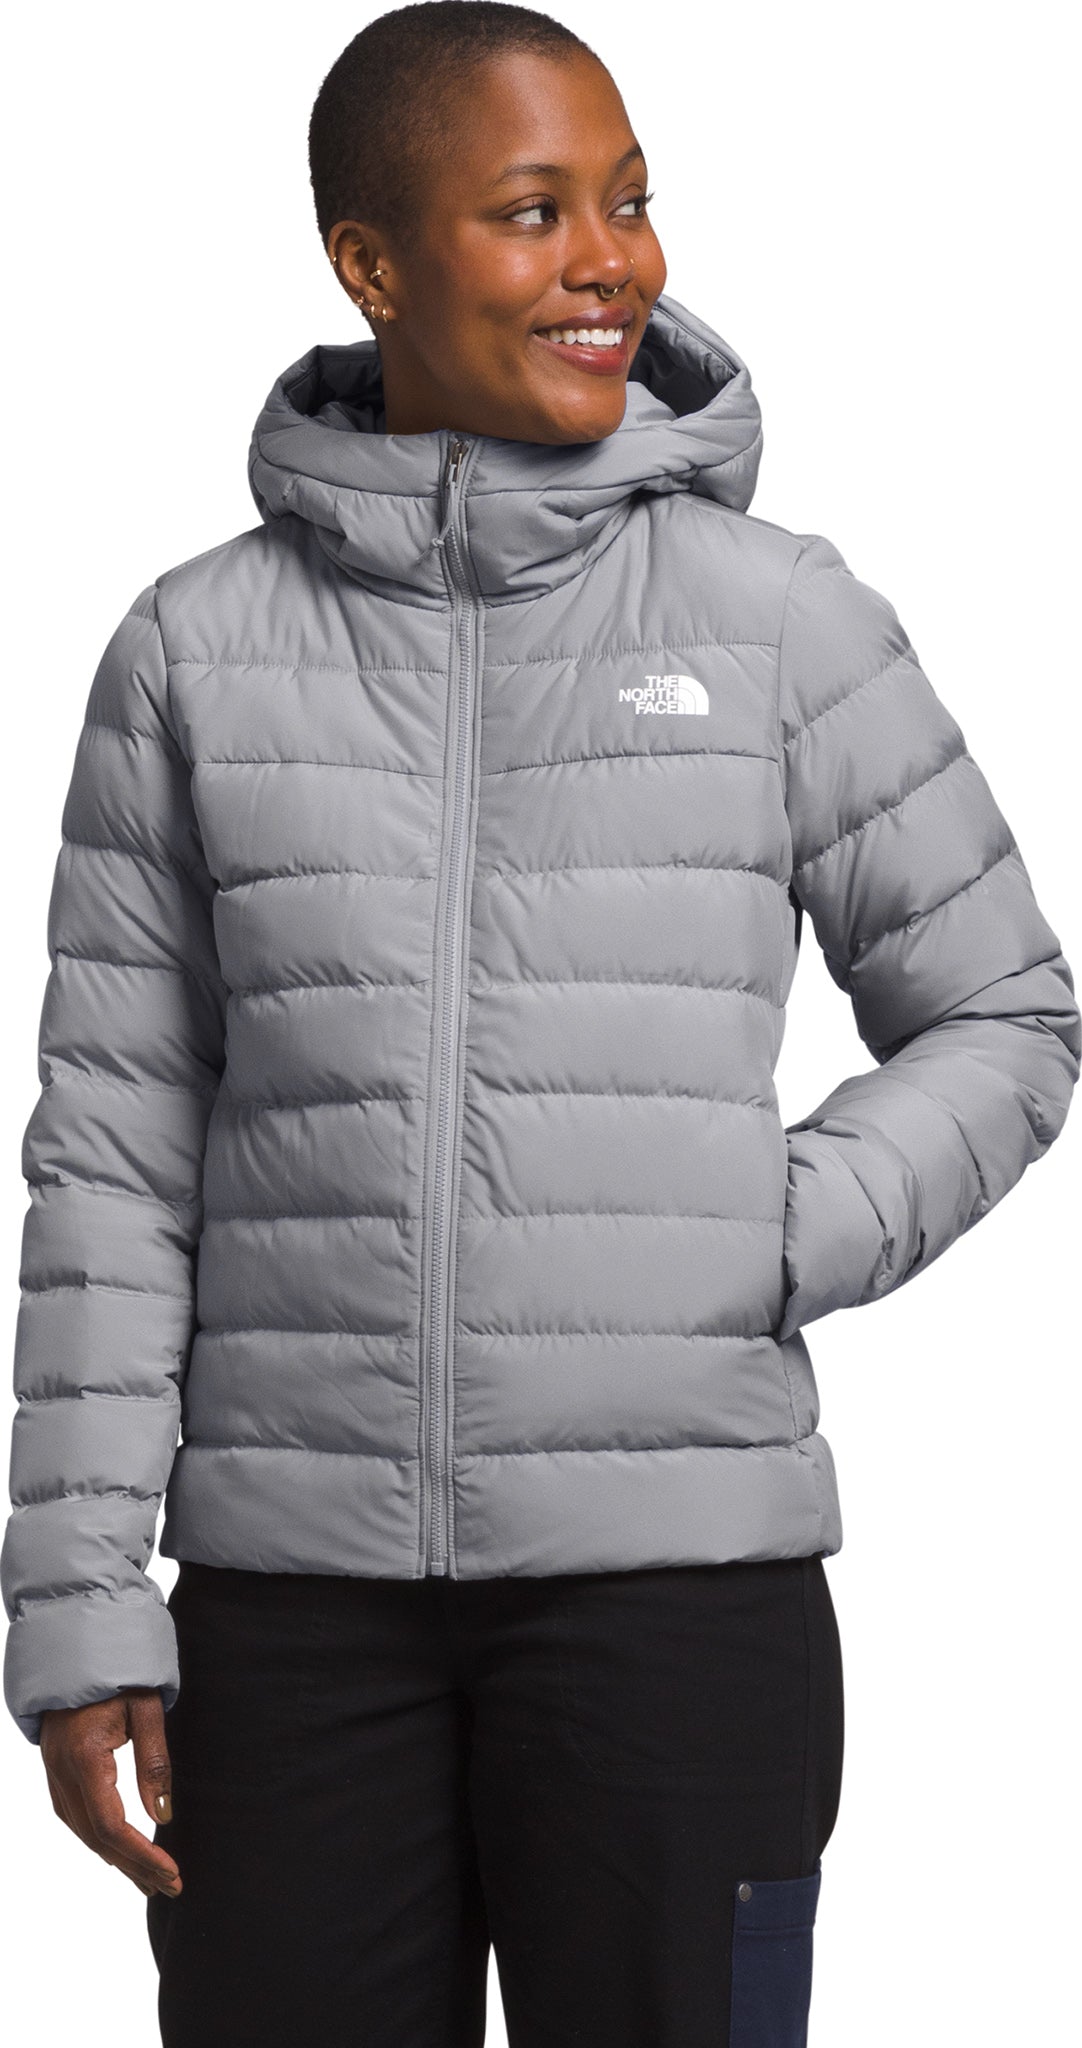 The North Face Summit Breithorn Hoodie - Women's Review